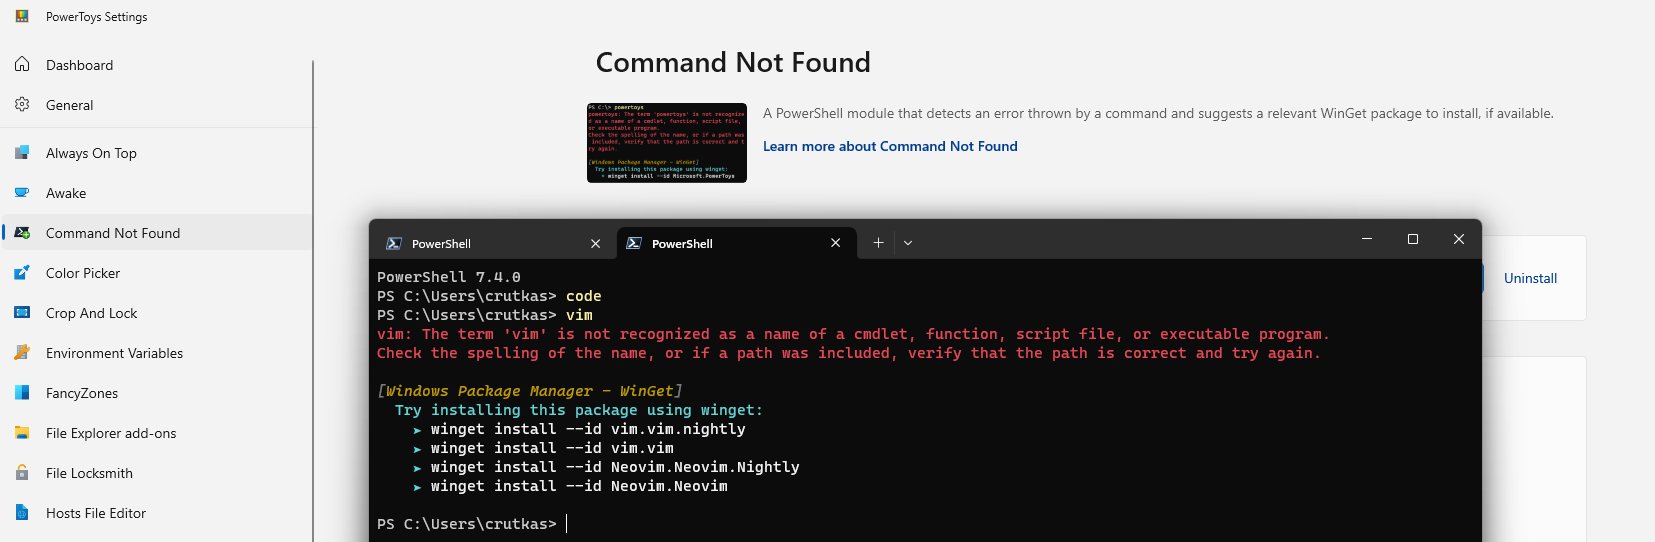 Command Not Found w PowerShell